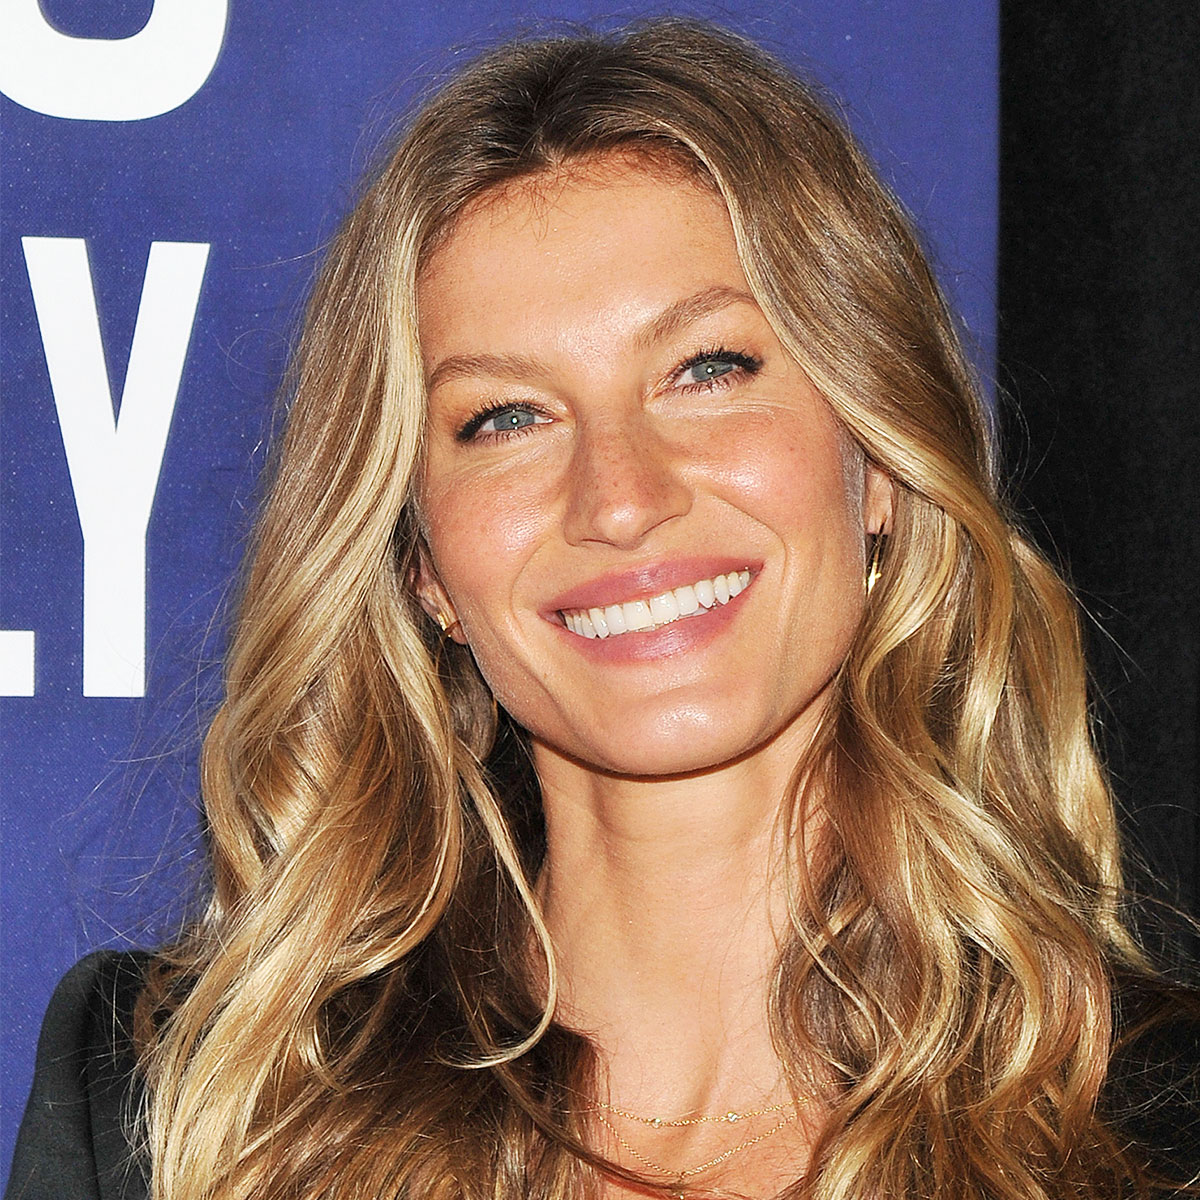 Gisele Bundchen sits on suitcase on beach in bizarre pics after